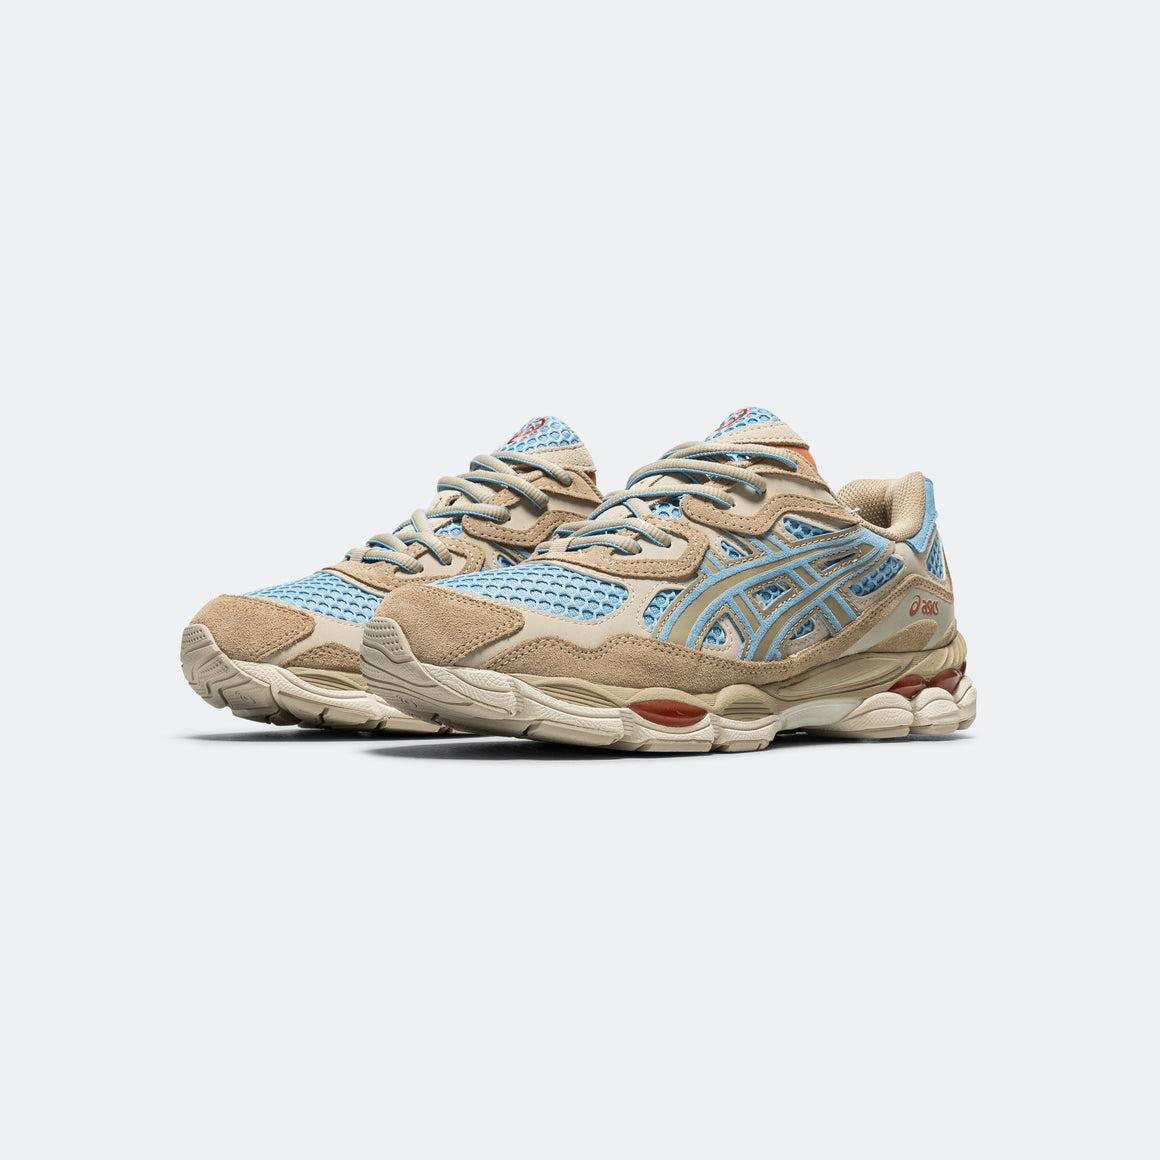 Asics - GEL-NYC - Harbor Blue/Wood Crepe - UP THERE